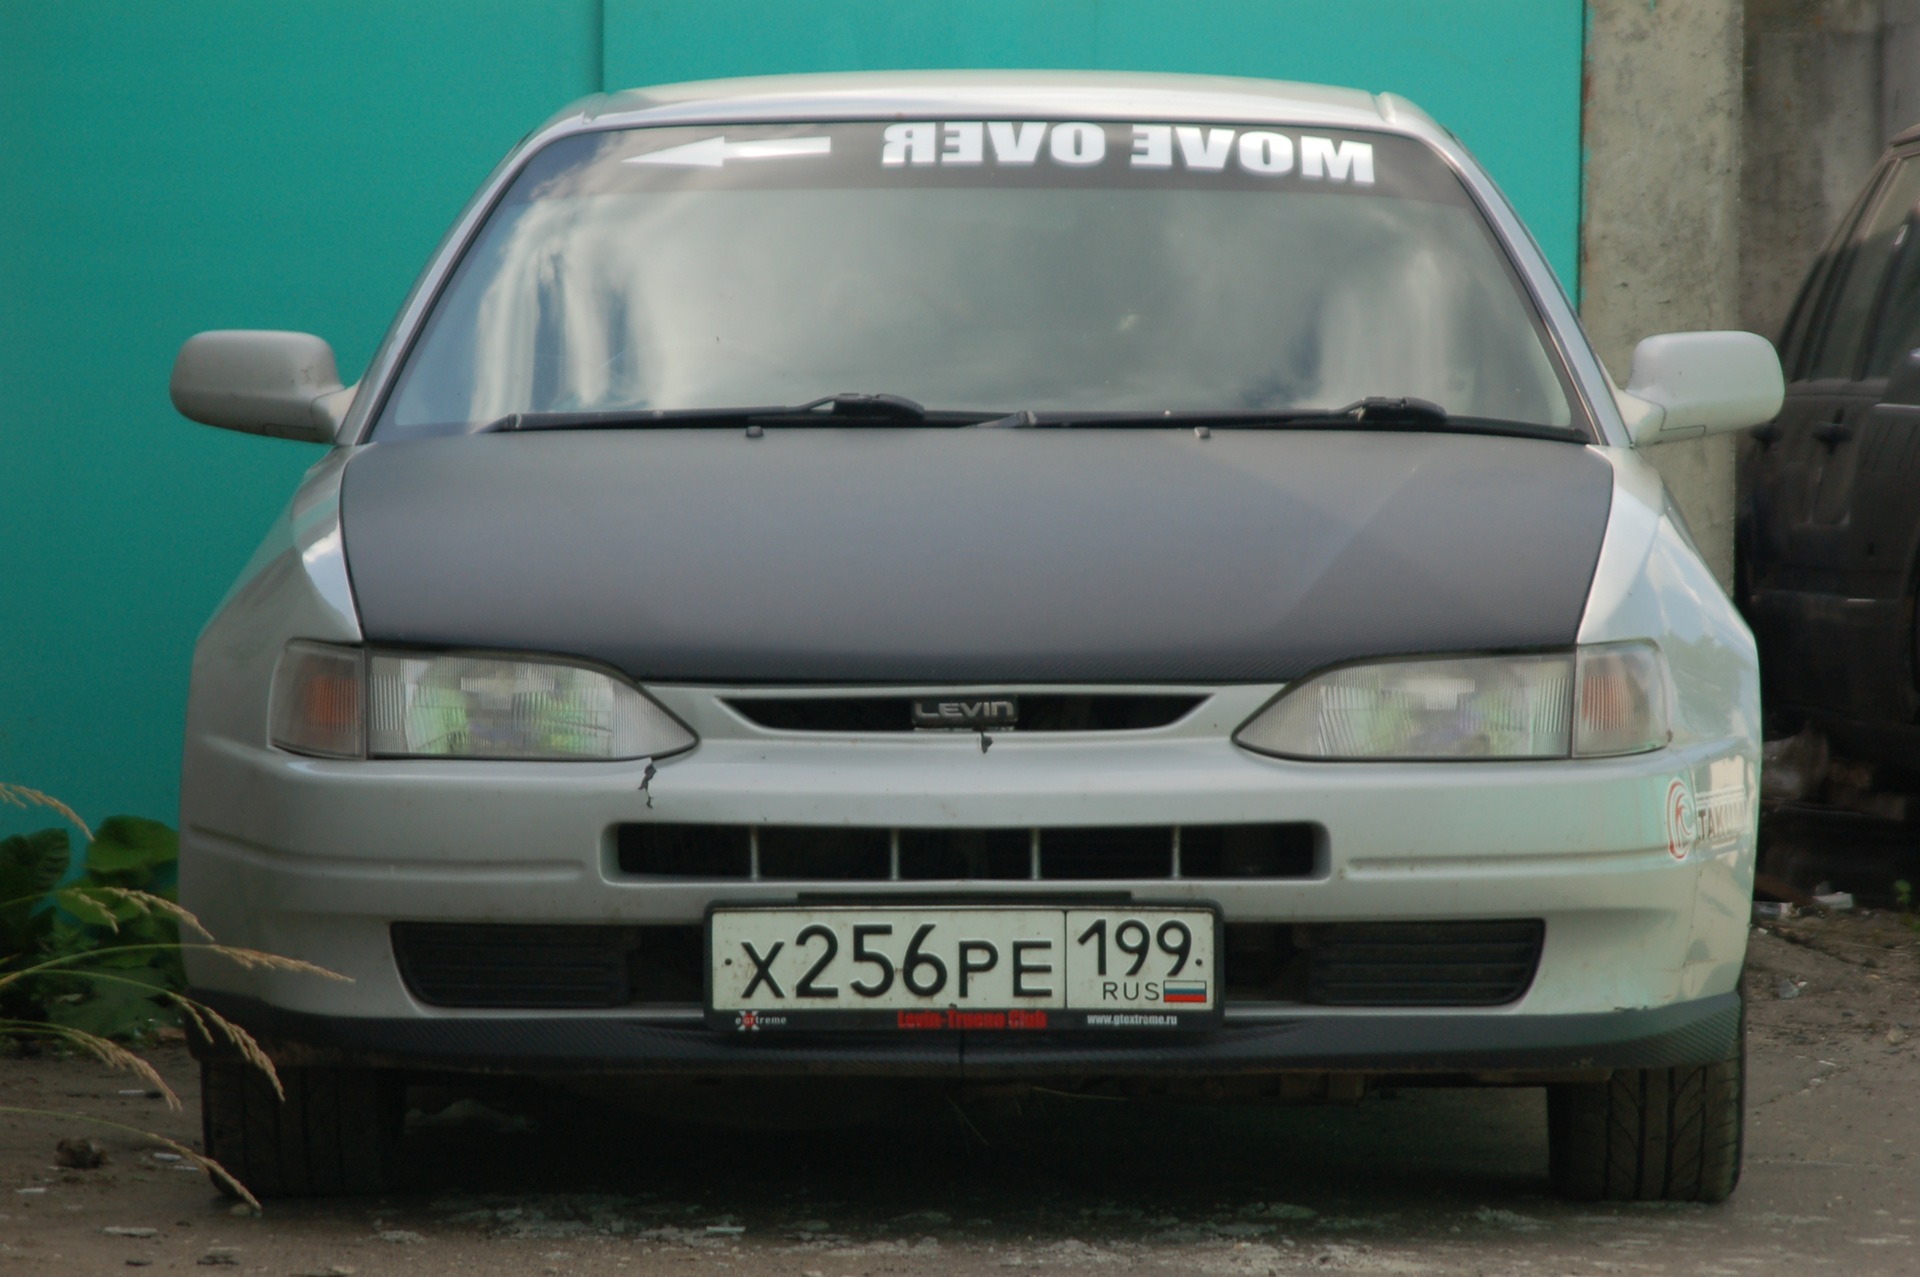 collective farm number 1 - Toyota Corolla Levin 20 liter 1996